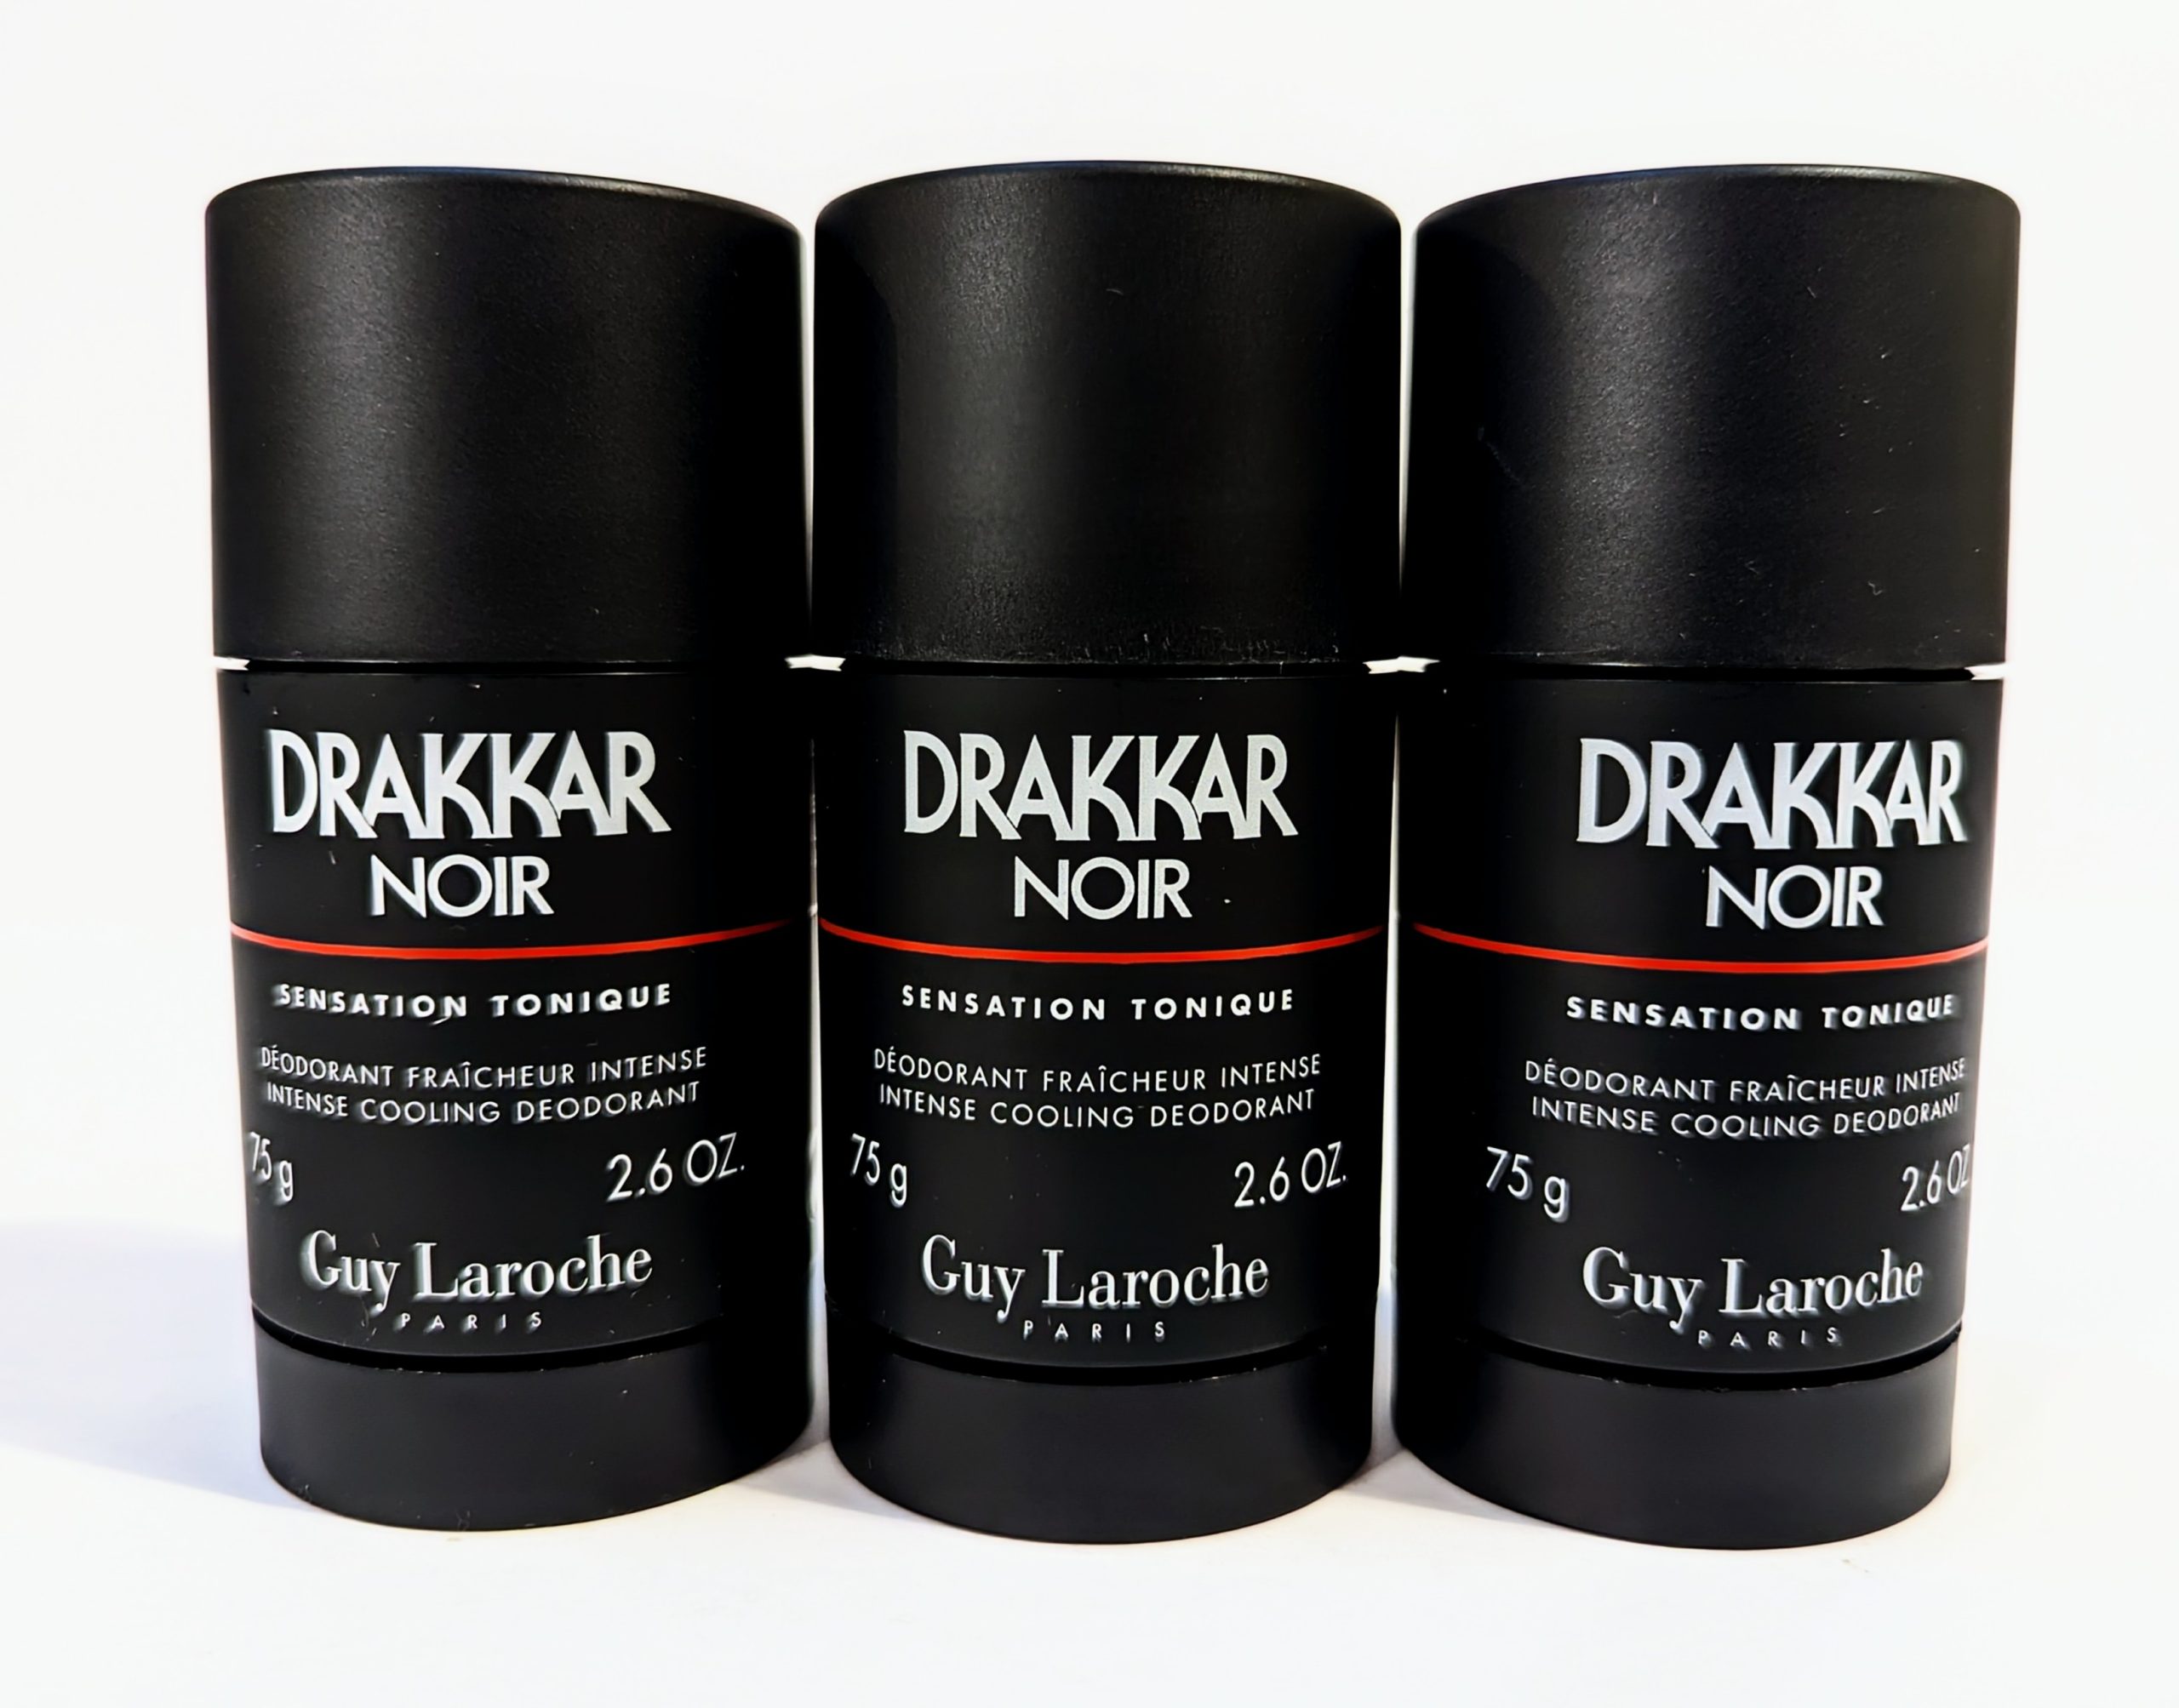 Three black 75g containers of Drakkar Noir Intense Cooling Deodorant by Guy Laroche are aligned side by side, showcasing the front labels.